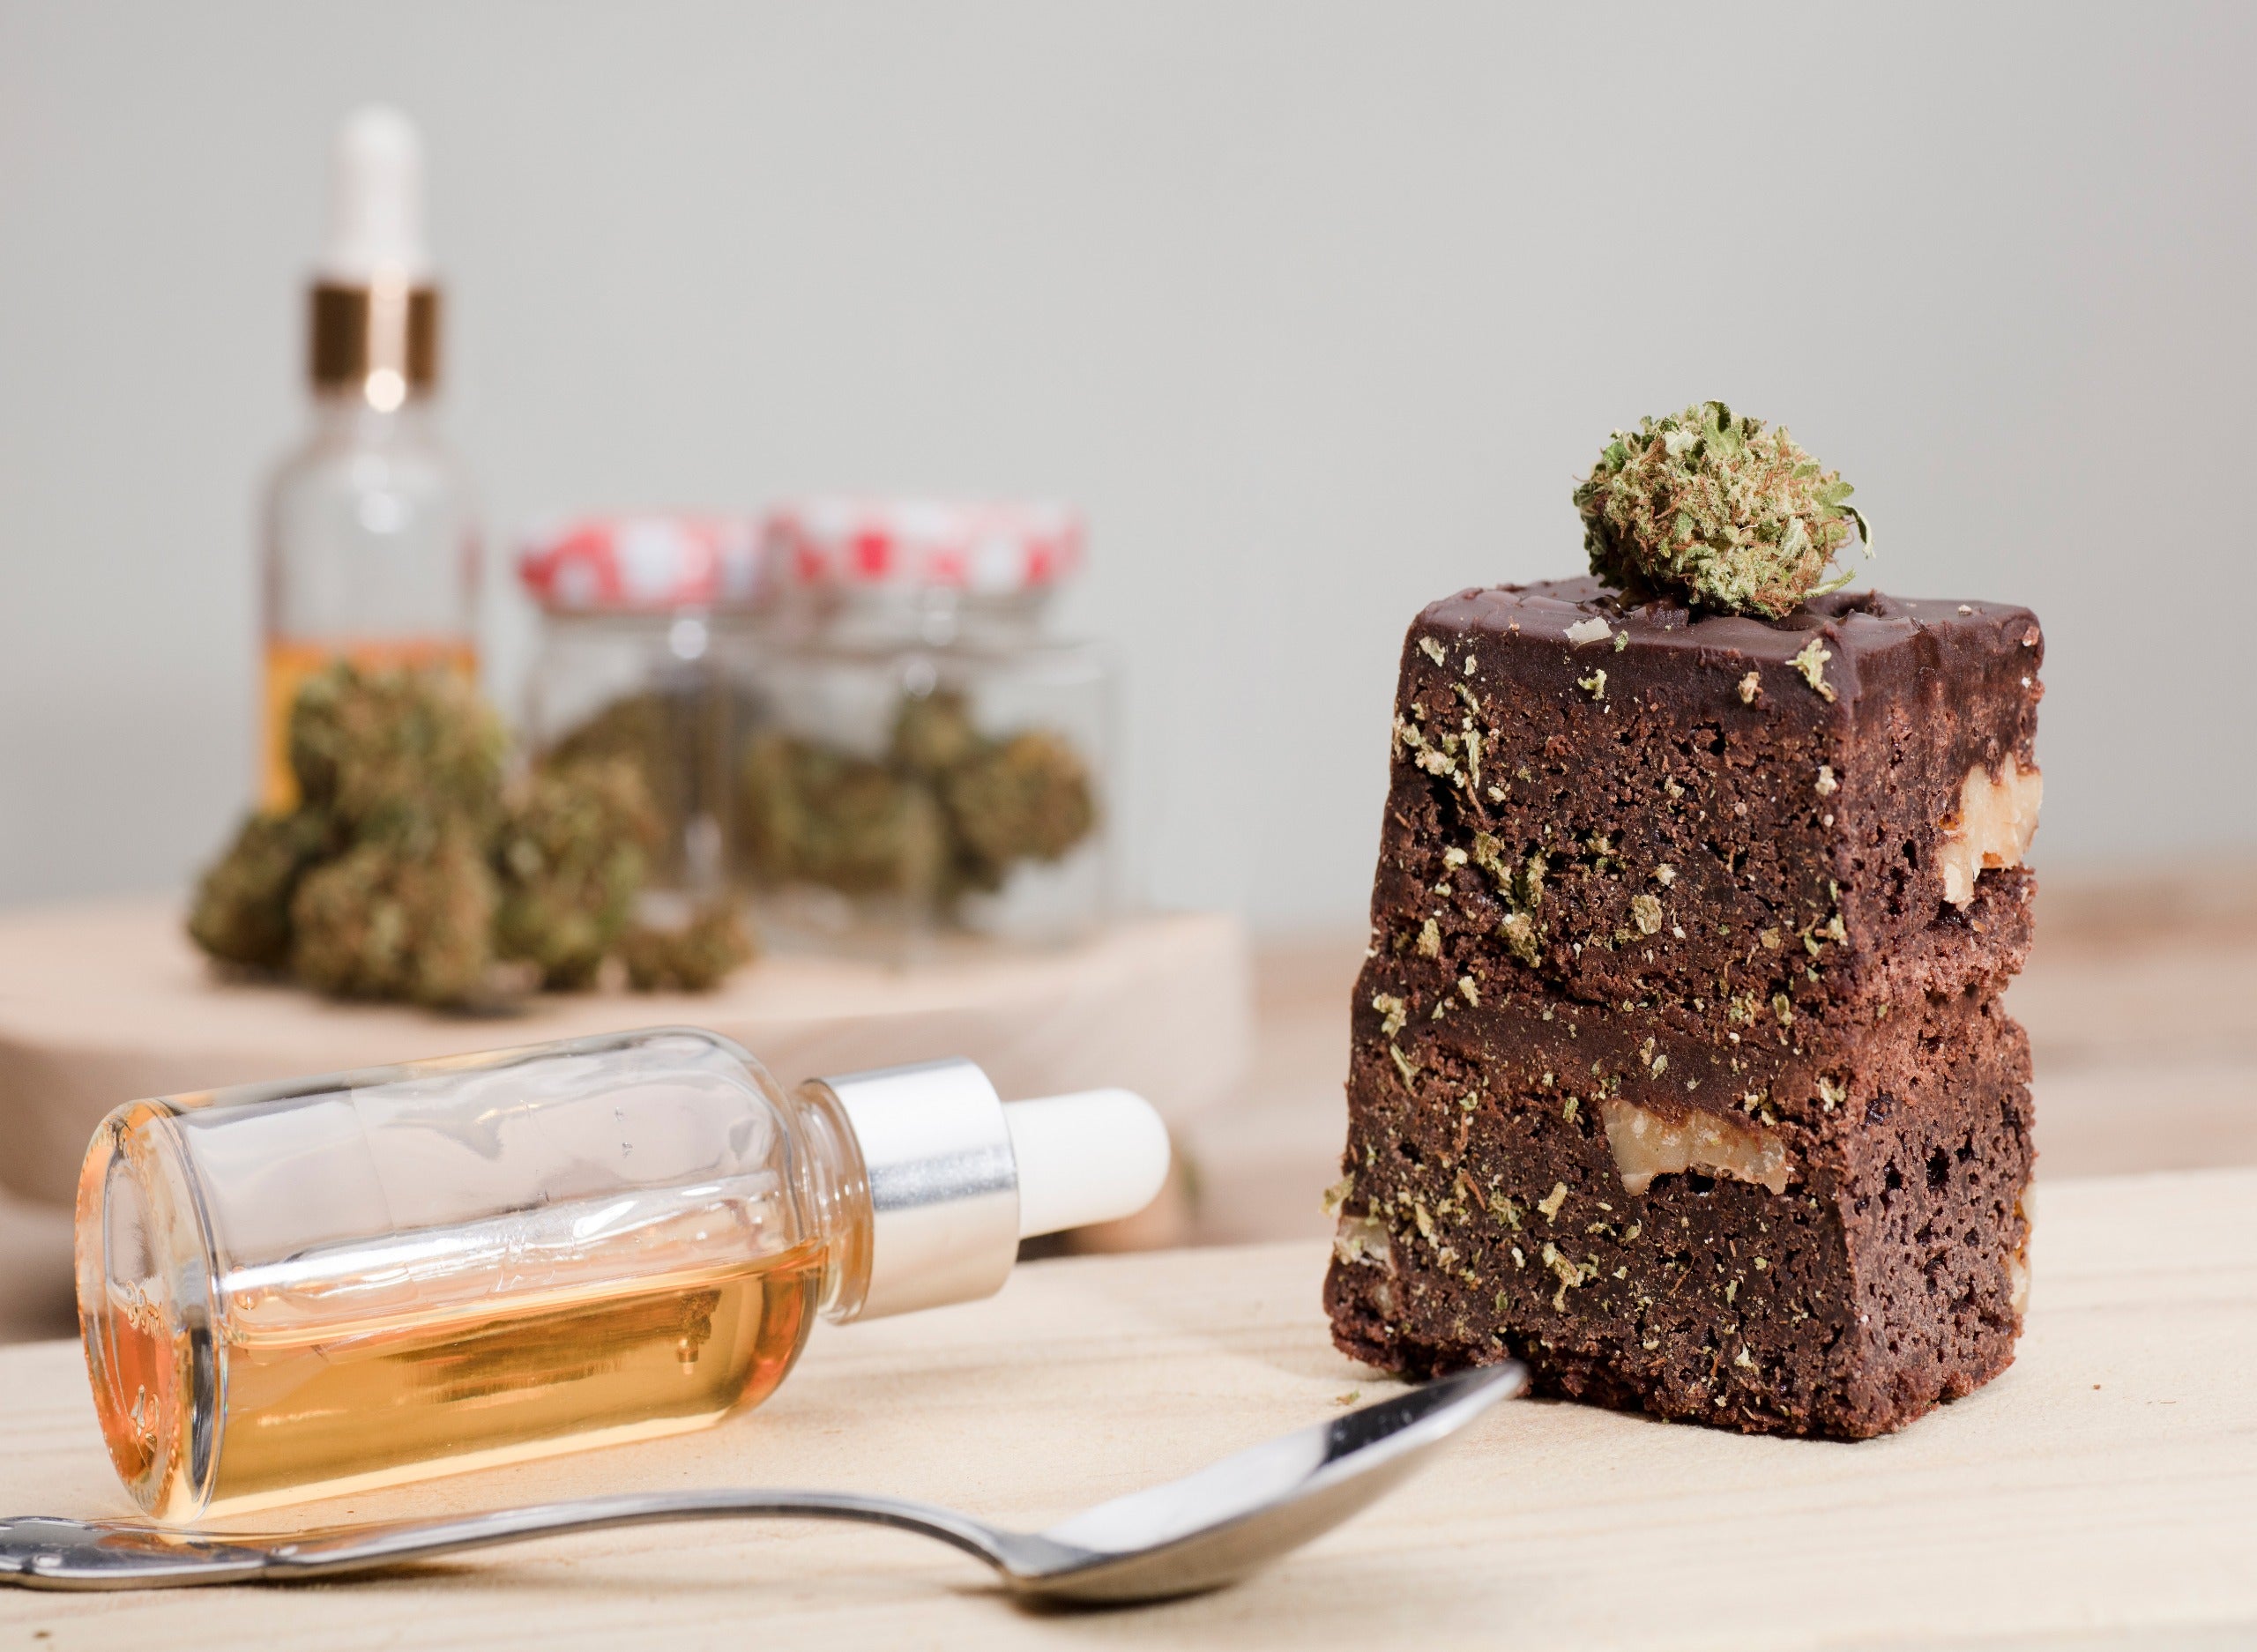 How to Make Cannabis Brownies